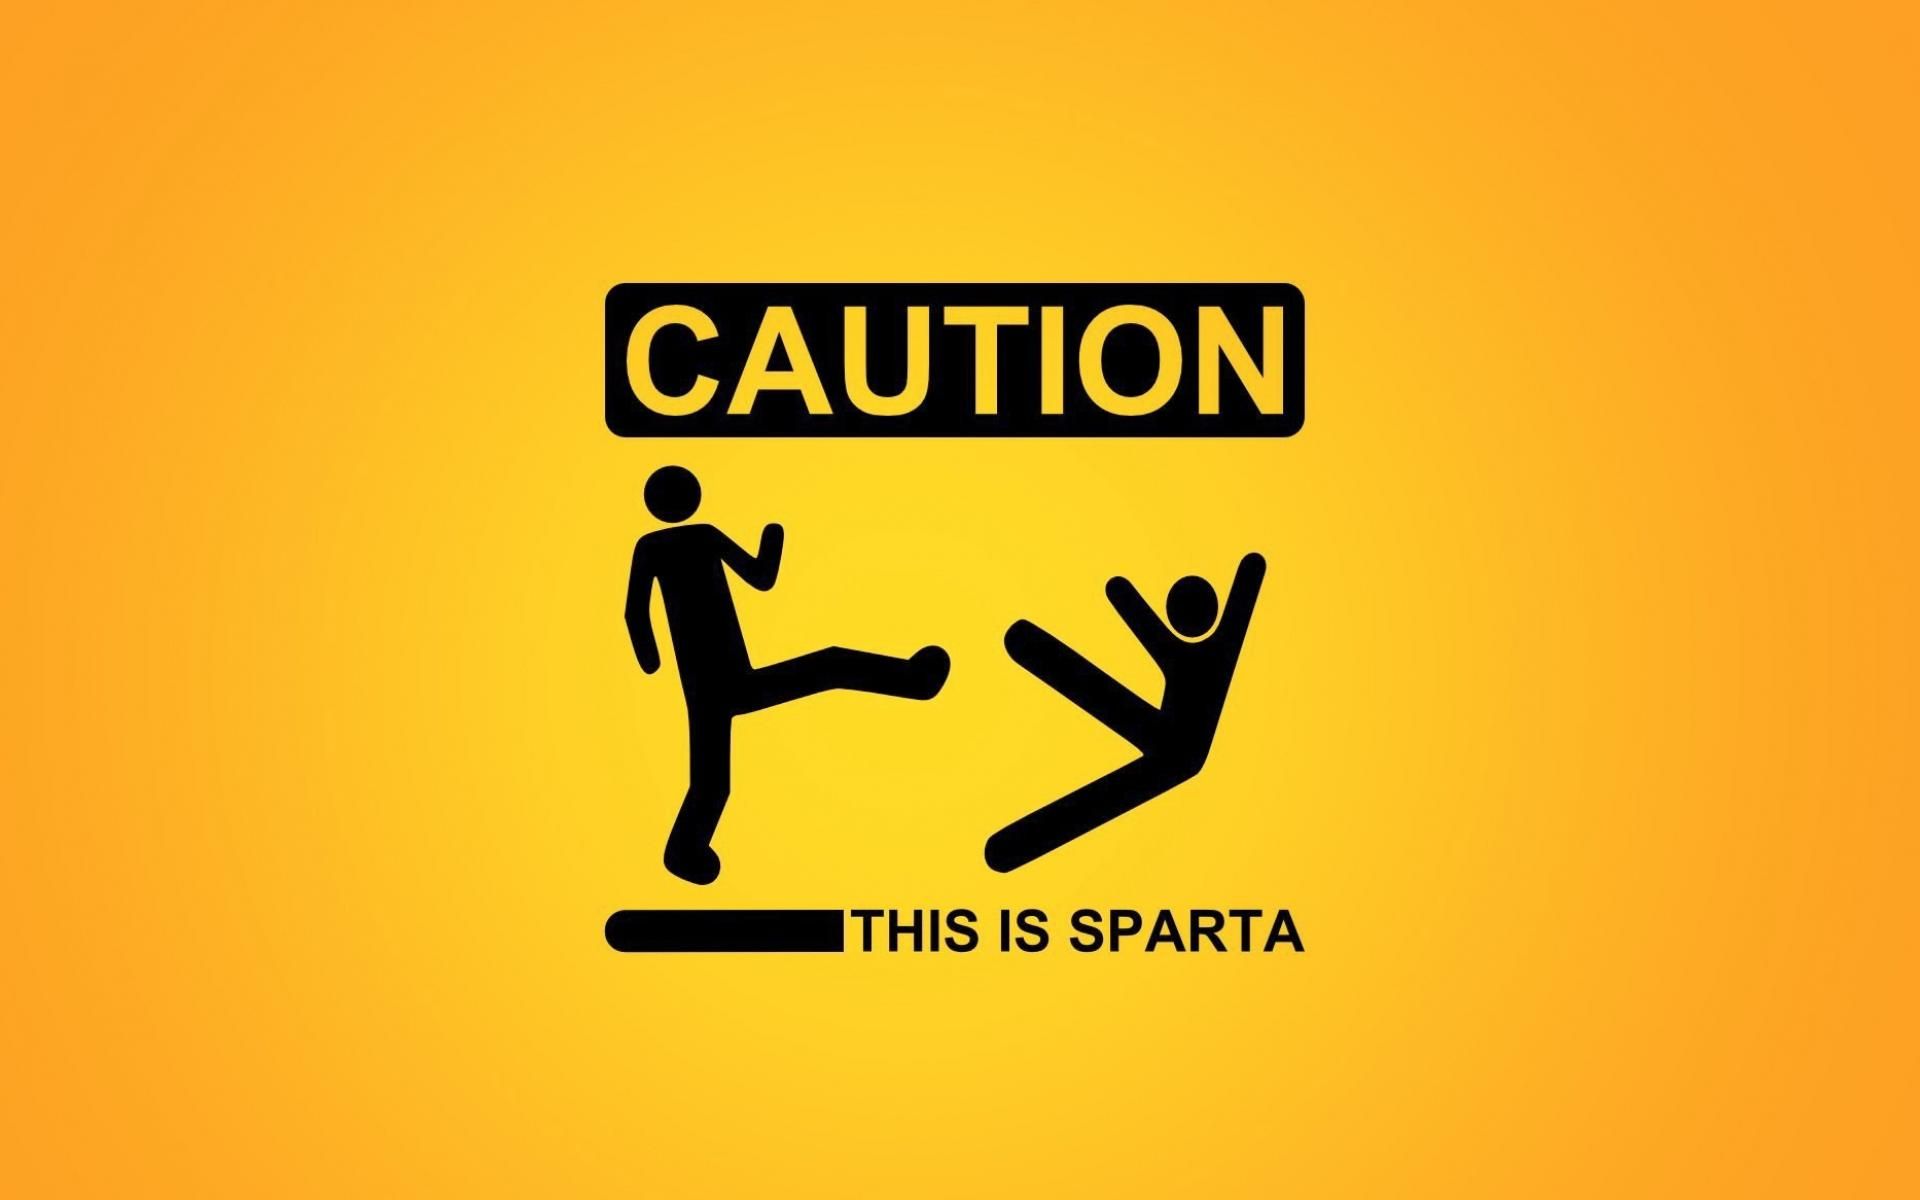 HD wallpaper, Is, This, Caution, Sparta